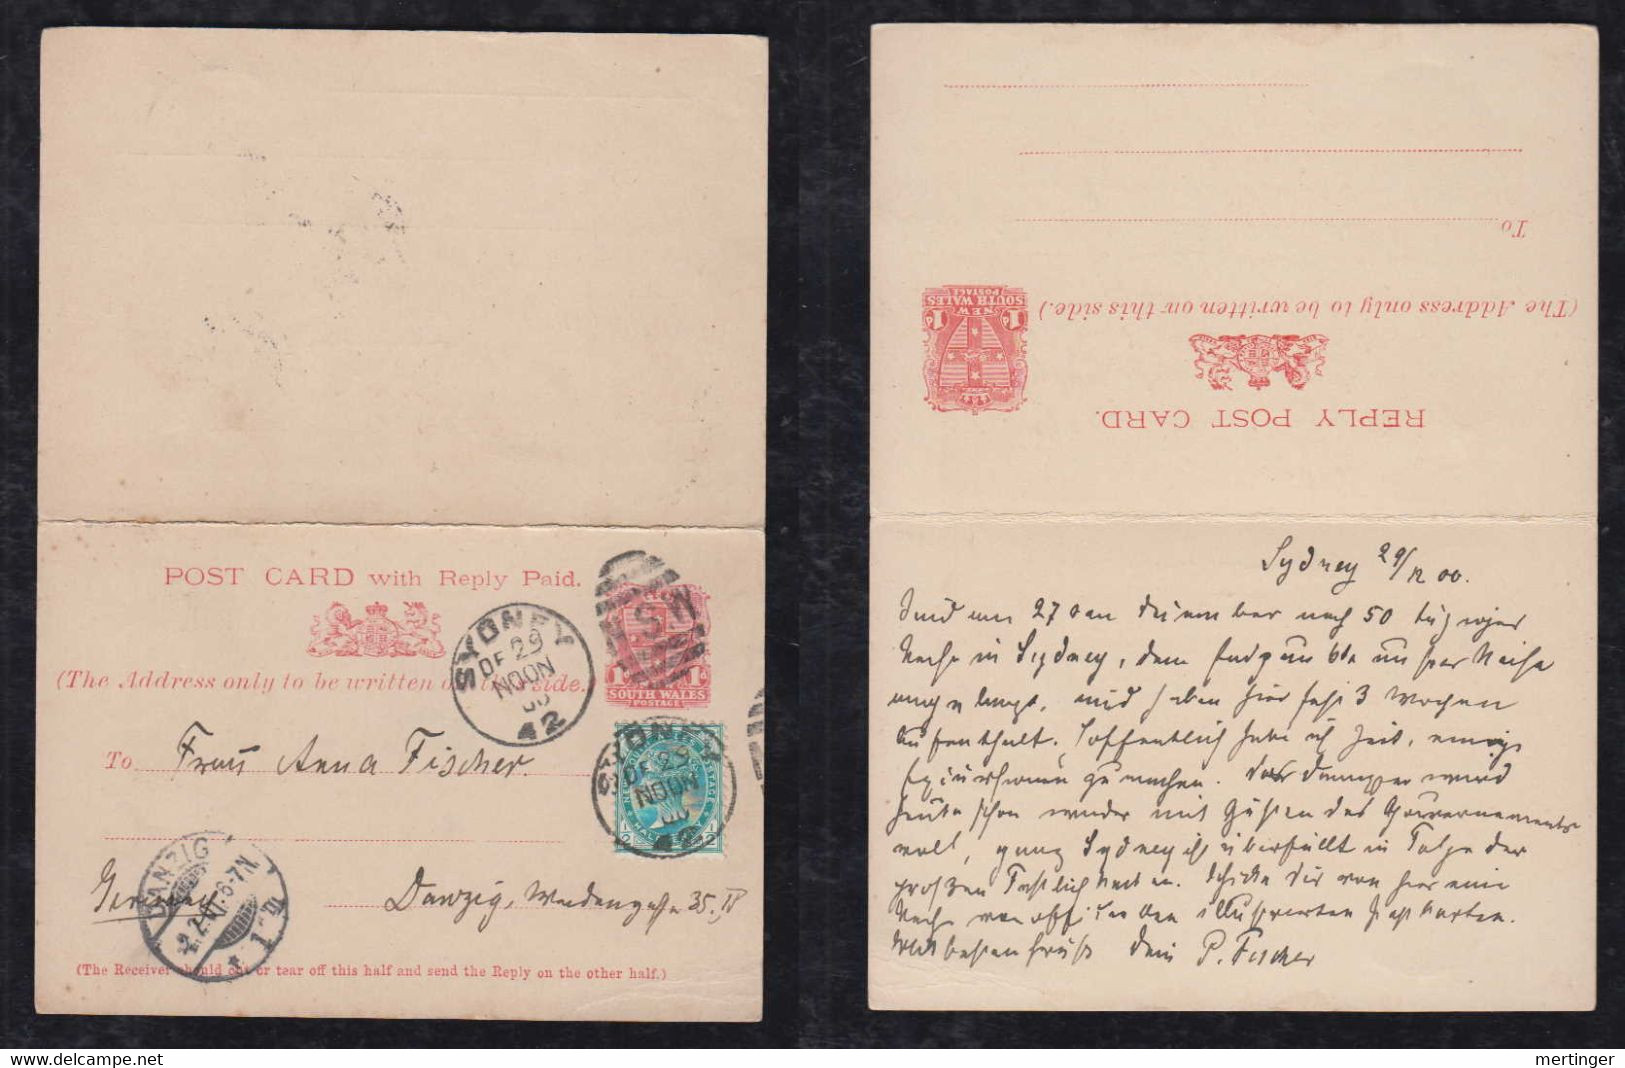 New South Wales Australia 1900 Stationery Question Reply Postcard Uprated SYDNEY X DANZIG Gdansk Germany Poland - Covers & Documents